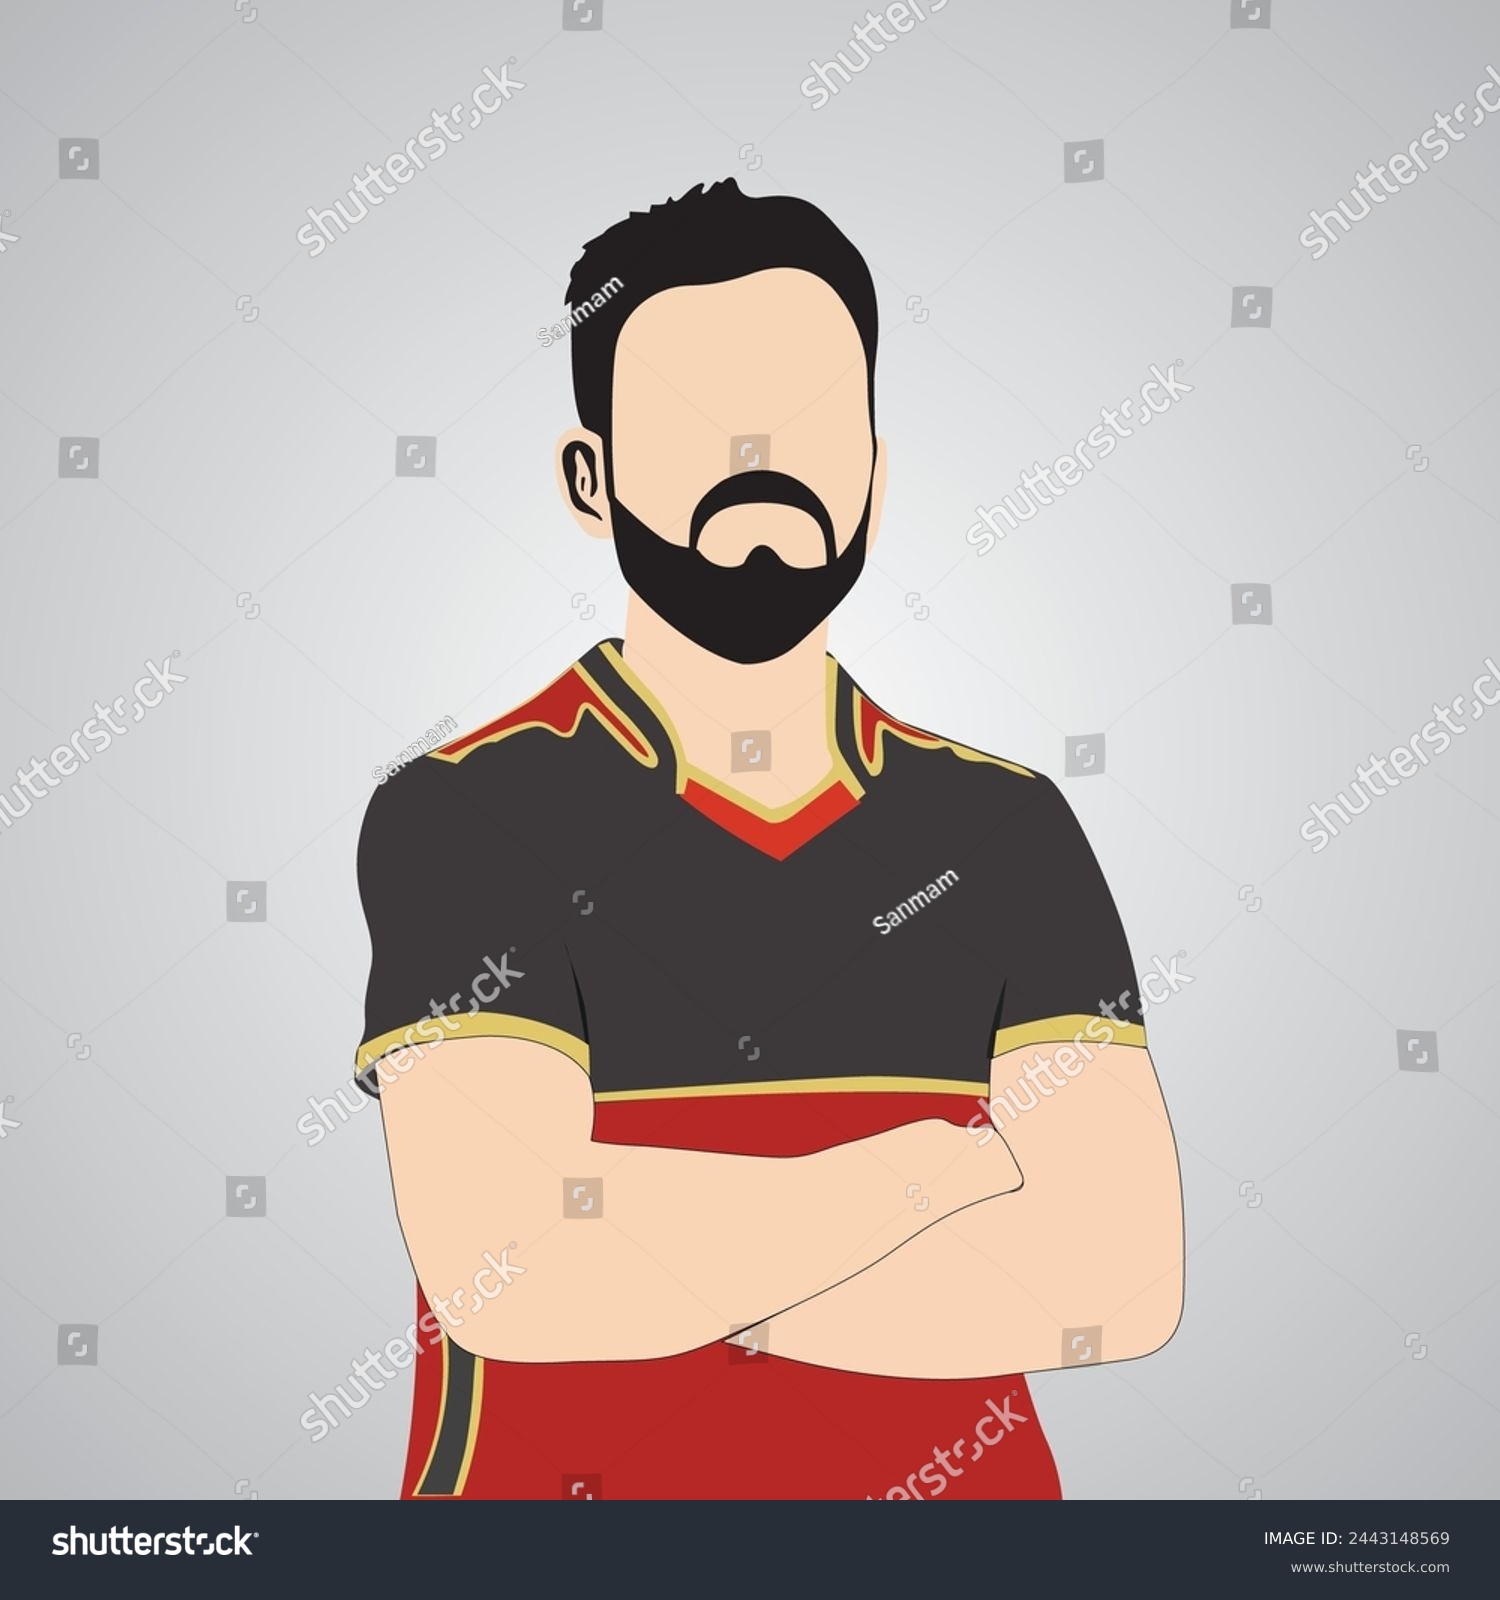 SVG of Vector illustration of Red Jersey cricket player Indian cricket player ipl cricketer  svg